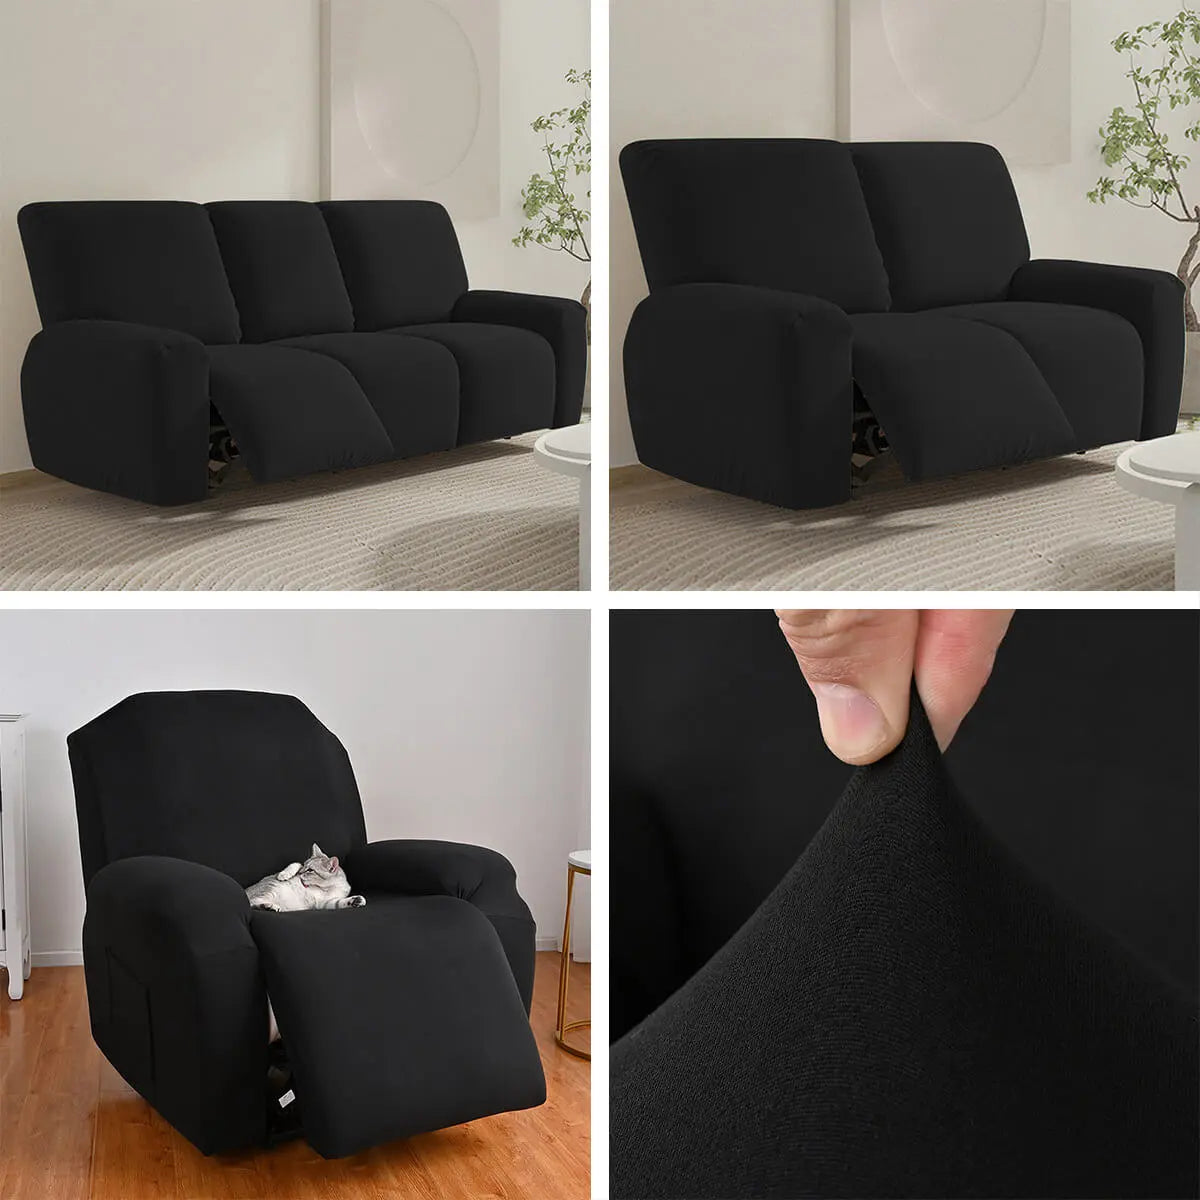 Crfatop Durable Recliner Chair Cover Solid Color Lazy Boy Recliner Slipcover